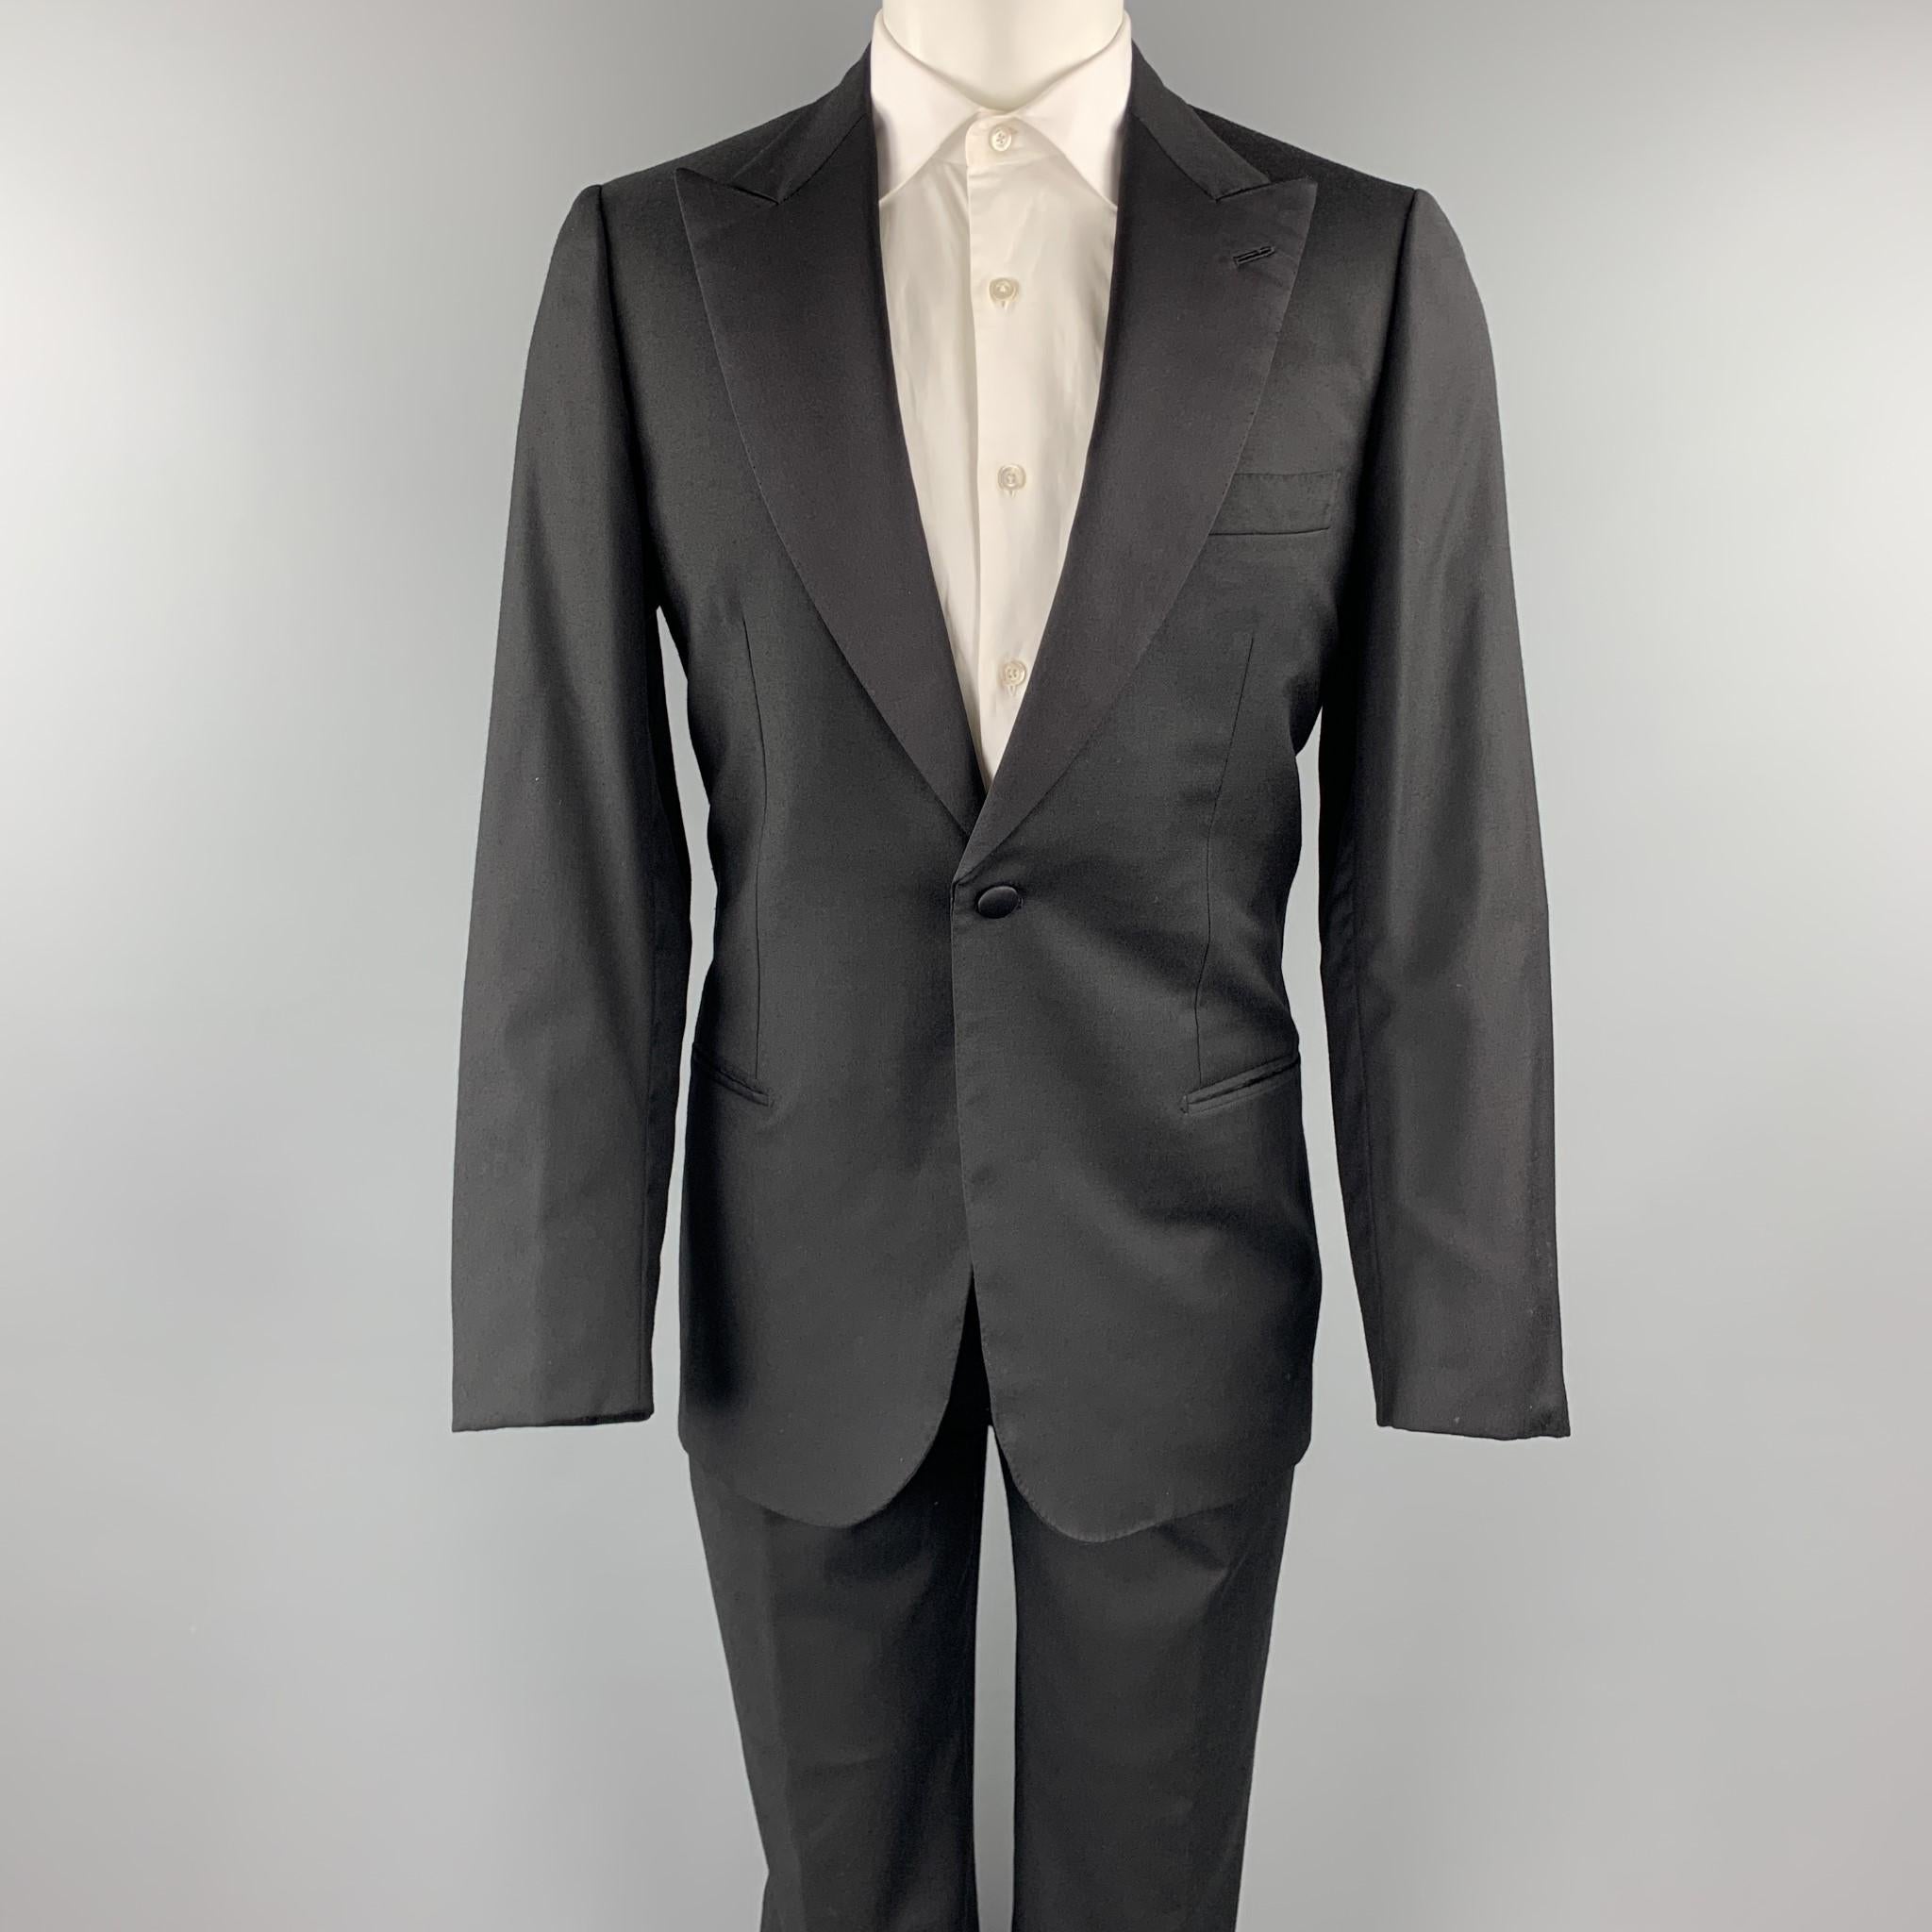 BRIONI for WILKES BASHFORD tuxedo suit comes in a black wool and includes a single breasted, single button sport coat with a peak lapel, monogram print liner, and matching pleated front trousers. Made in Italy.

Excellent Pre-Owned